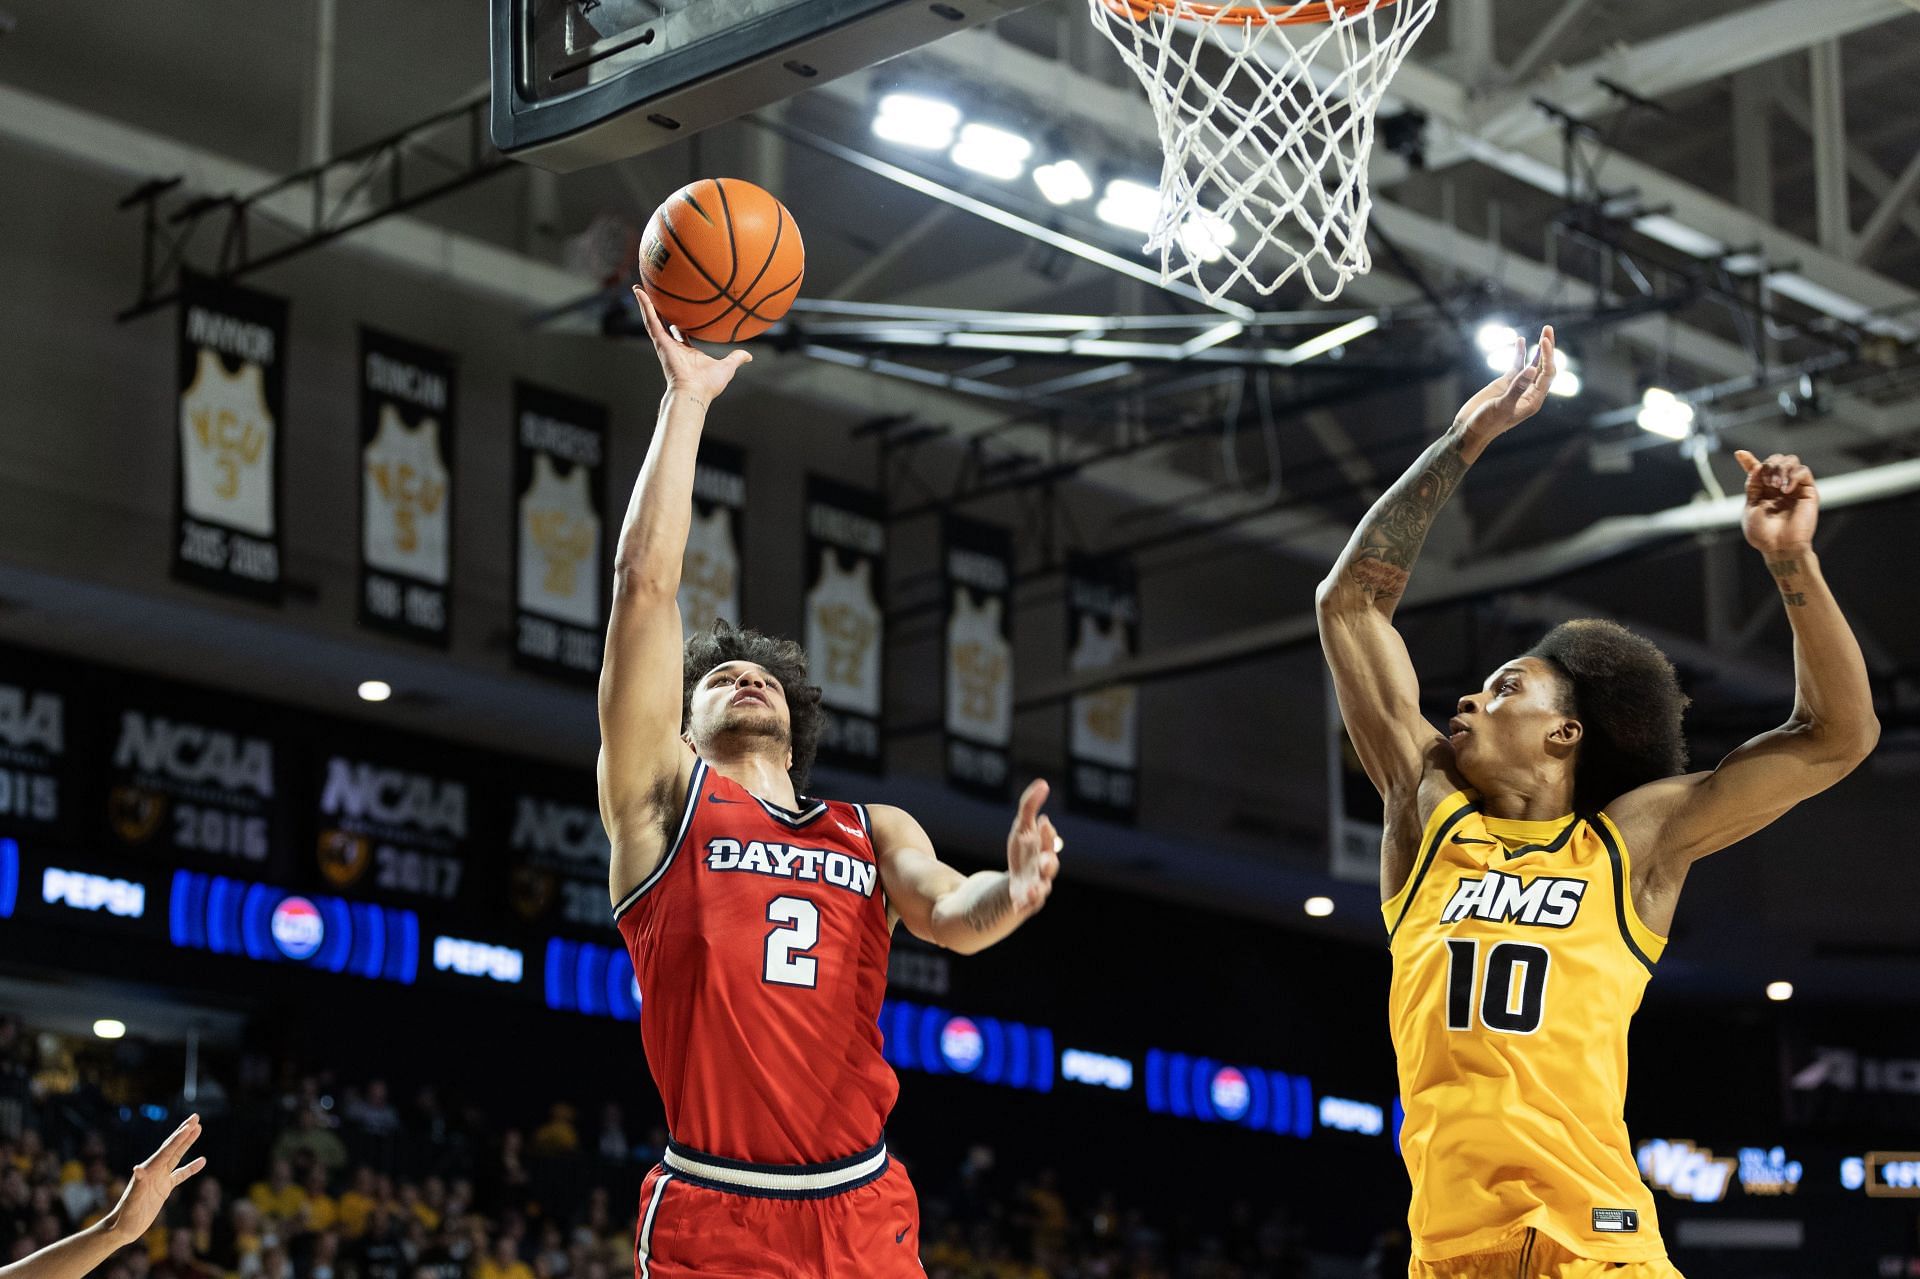 Despite a No. 3 seed, Dayton and Nate Santos will be favorites to win the Atlantic 10 Tournament this weekend.